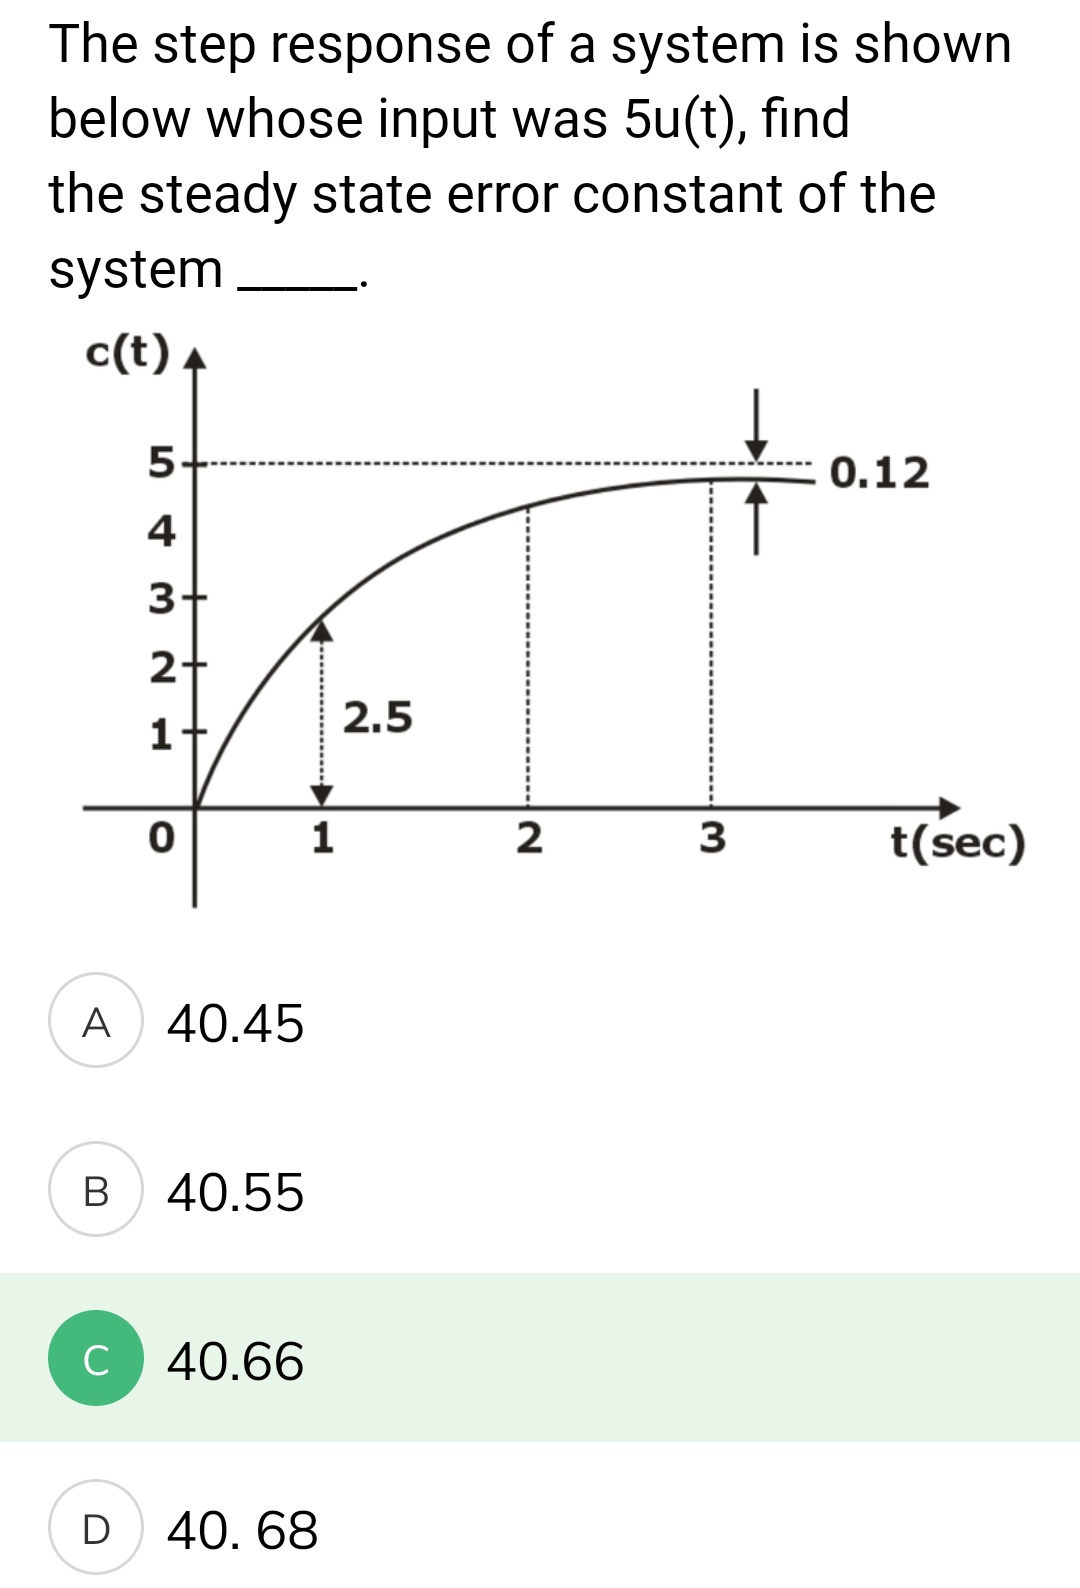 The step response of a system is shown
below whose input was 5u(t), find
the steady state error constant of the
system
c(t)
5
0.12
4
3-
2
2.5
1+
0
A 40.45
B 40.55
C 40.66
D 40.68
1
2
3
t(sec)